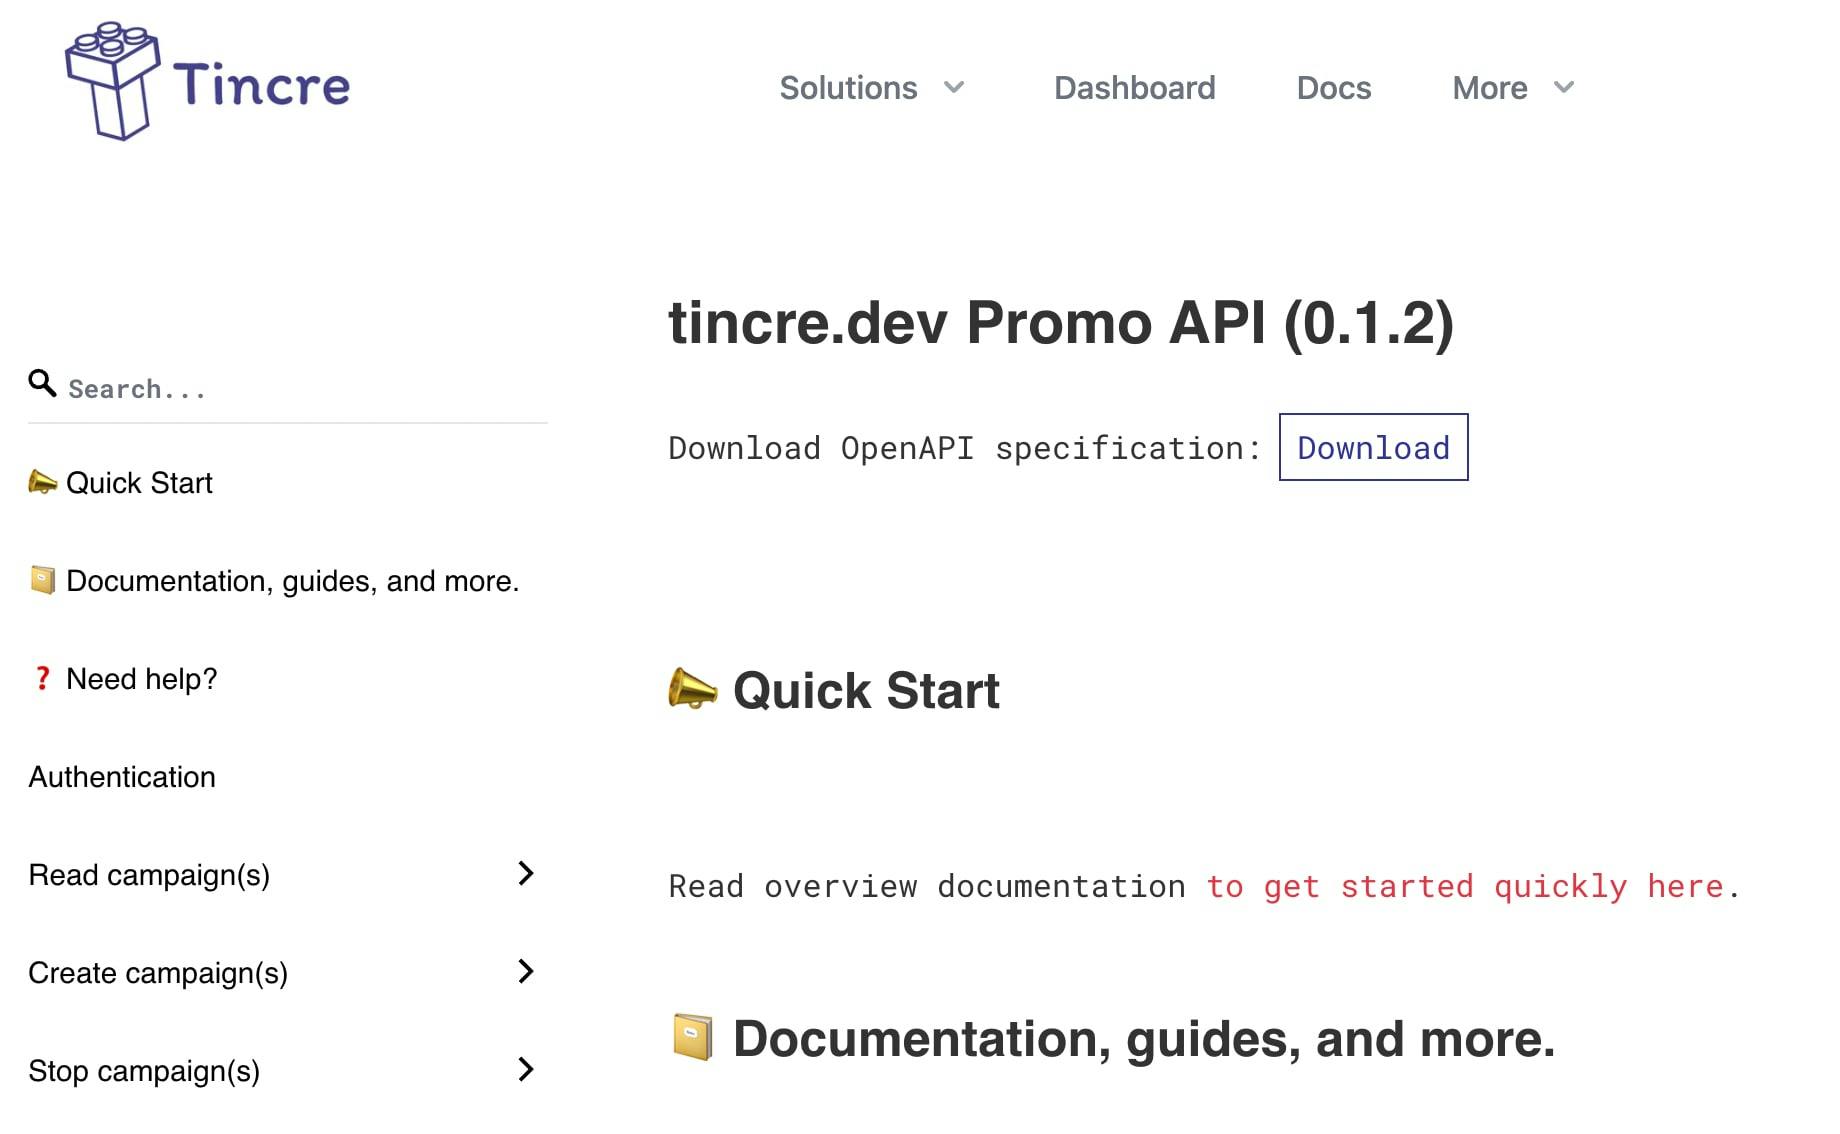 The Promo API documentation themed with redoc for https://tincre.dev